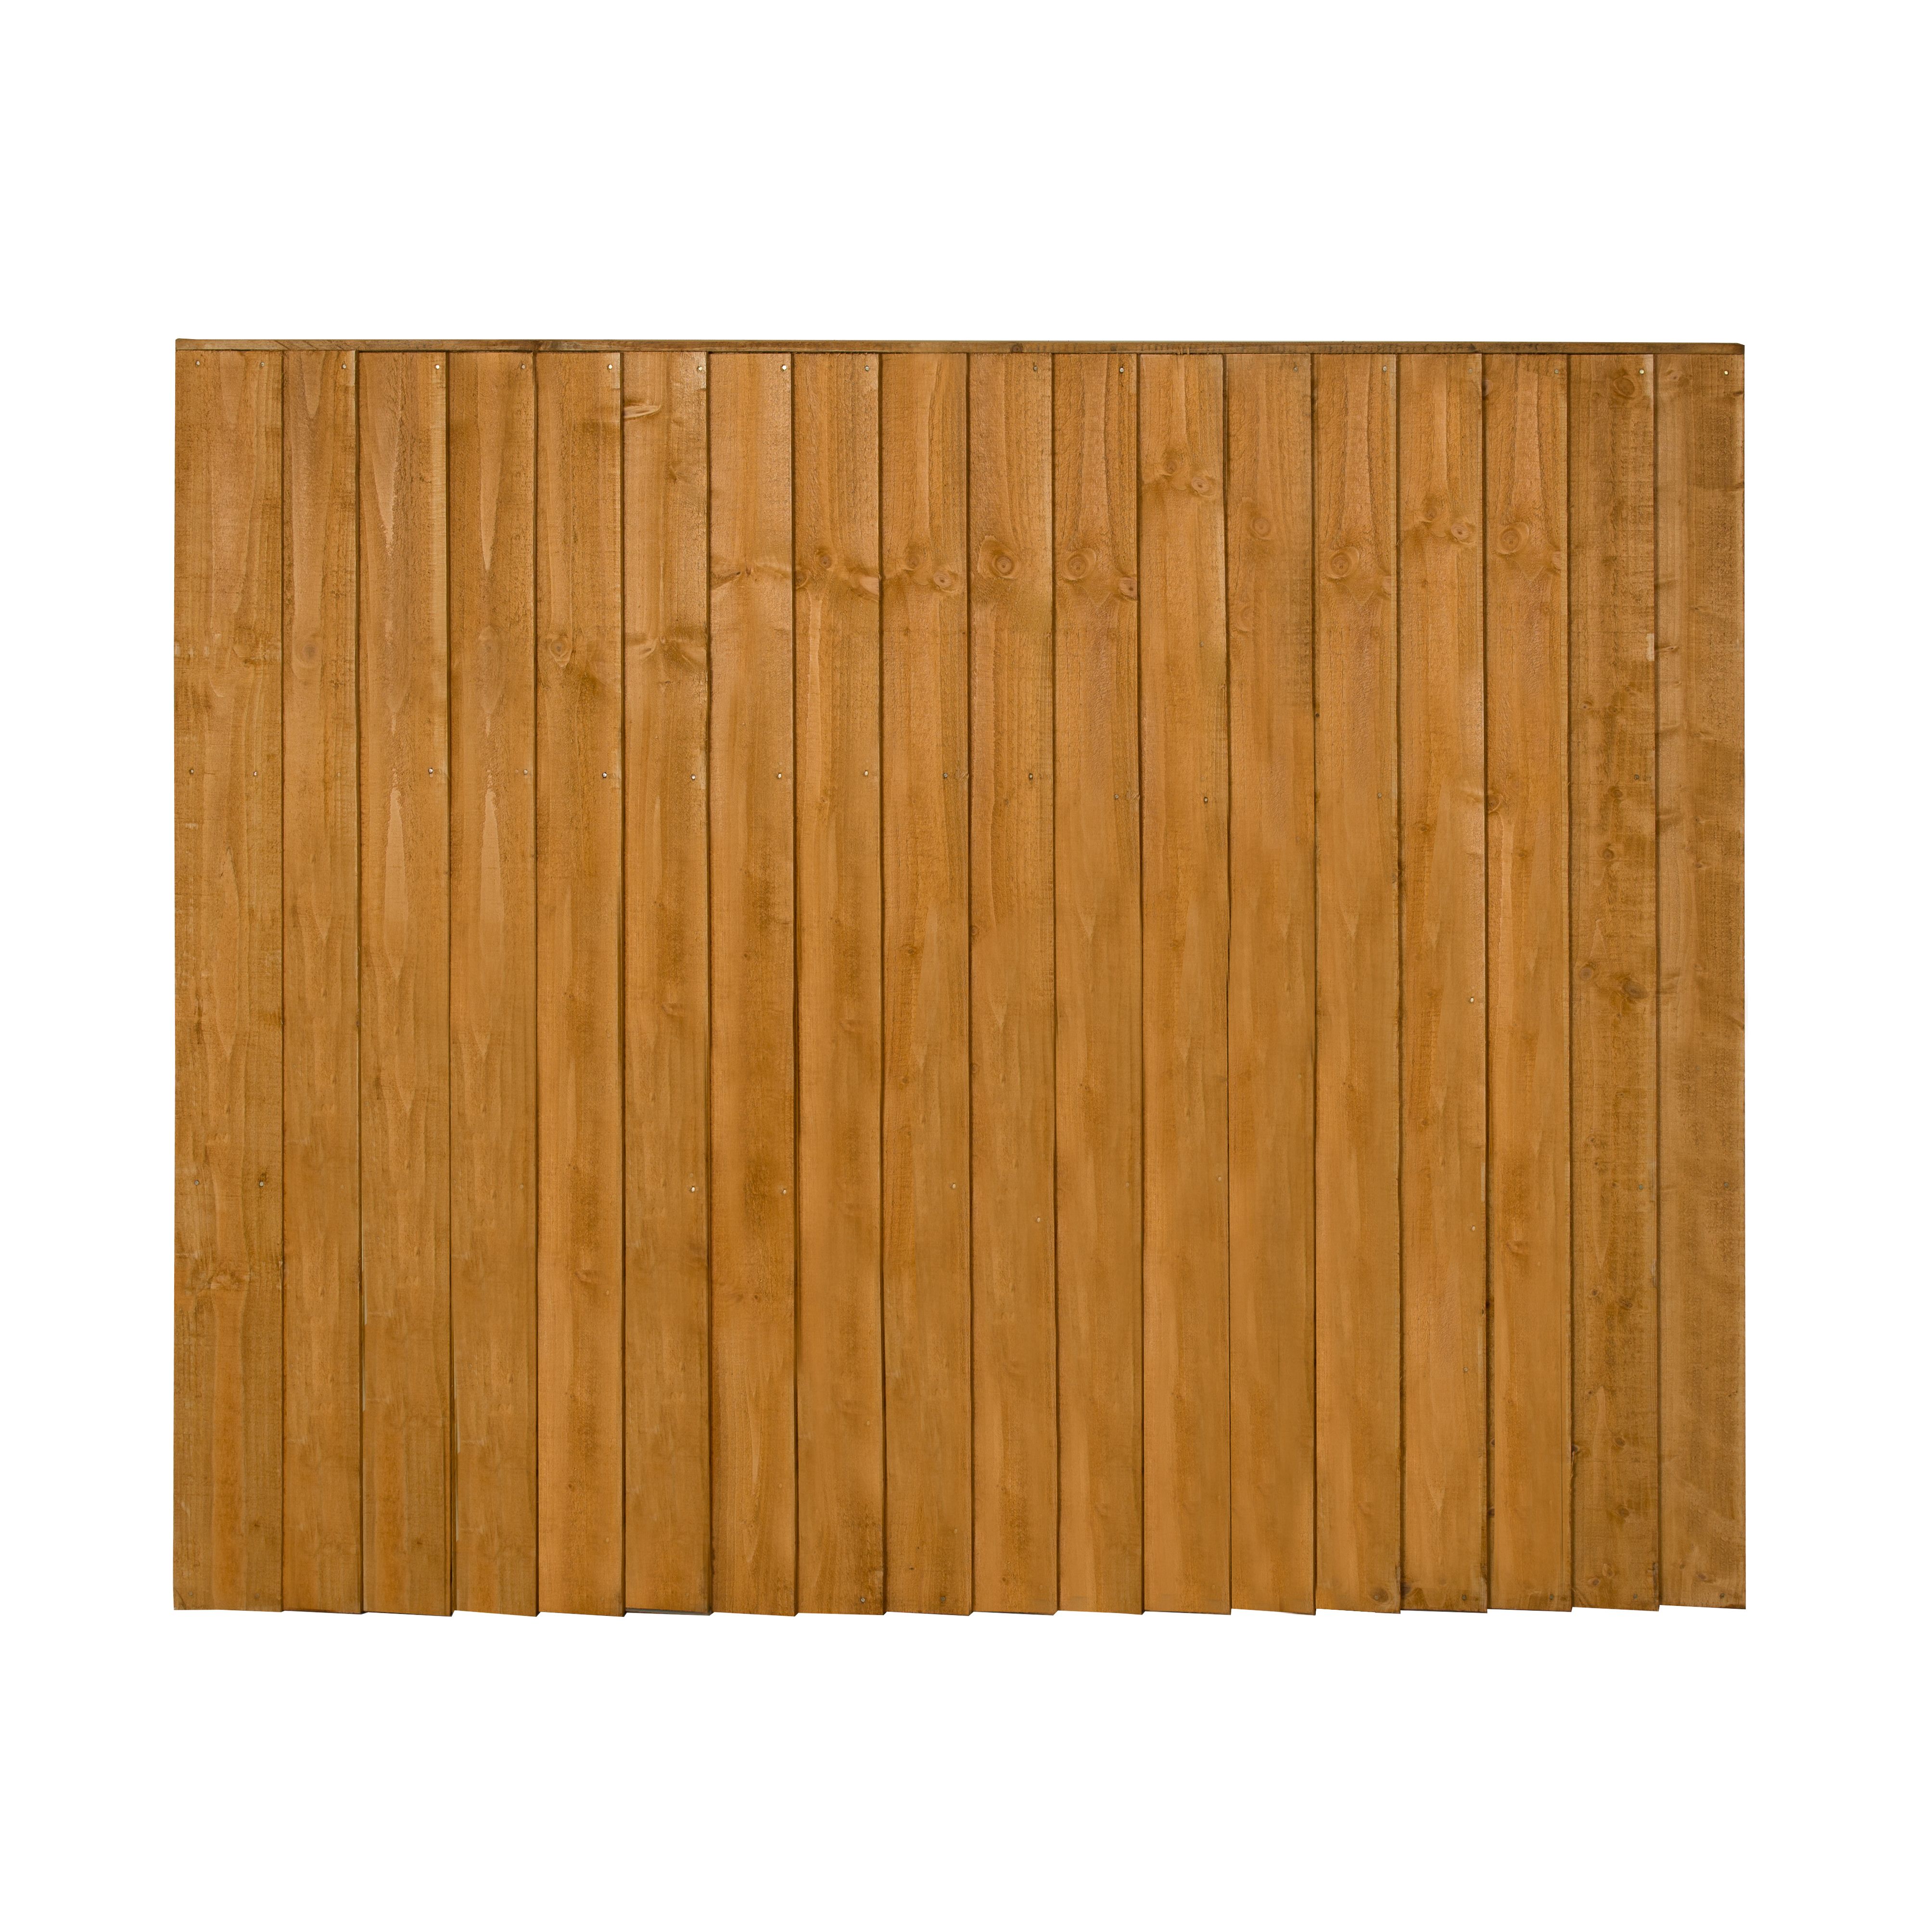 Traditional Feather edge 5ft Wooden Fence panel (W)1.83m (H)1.54m, Pack of 5